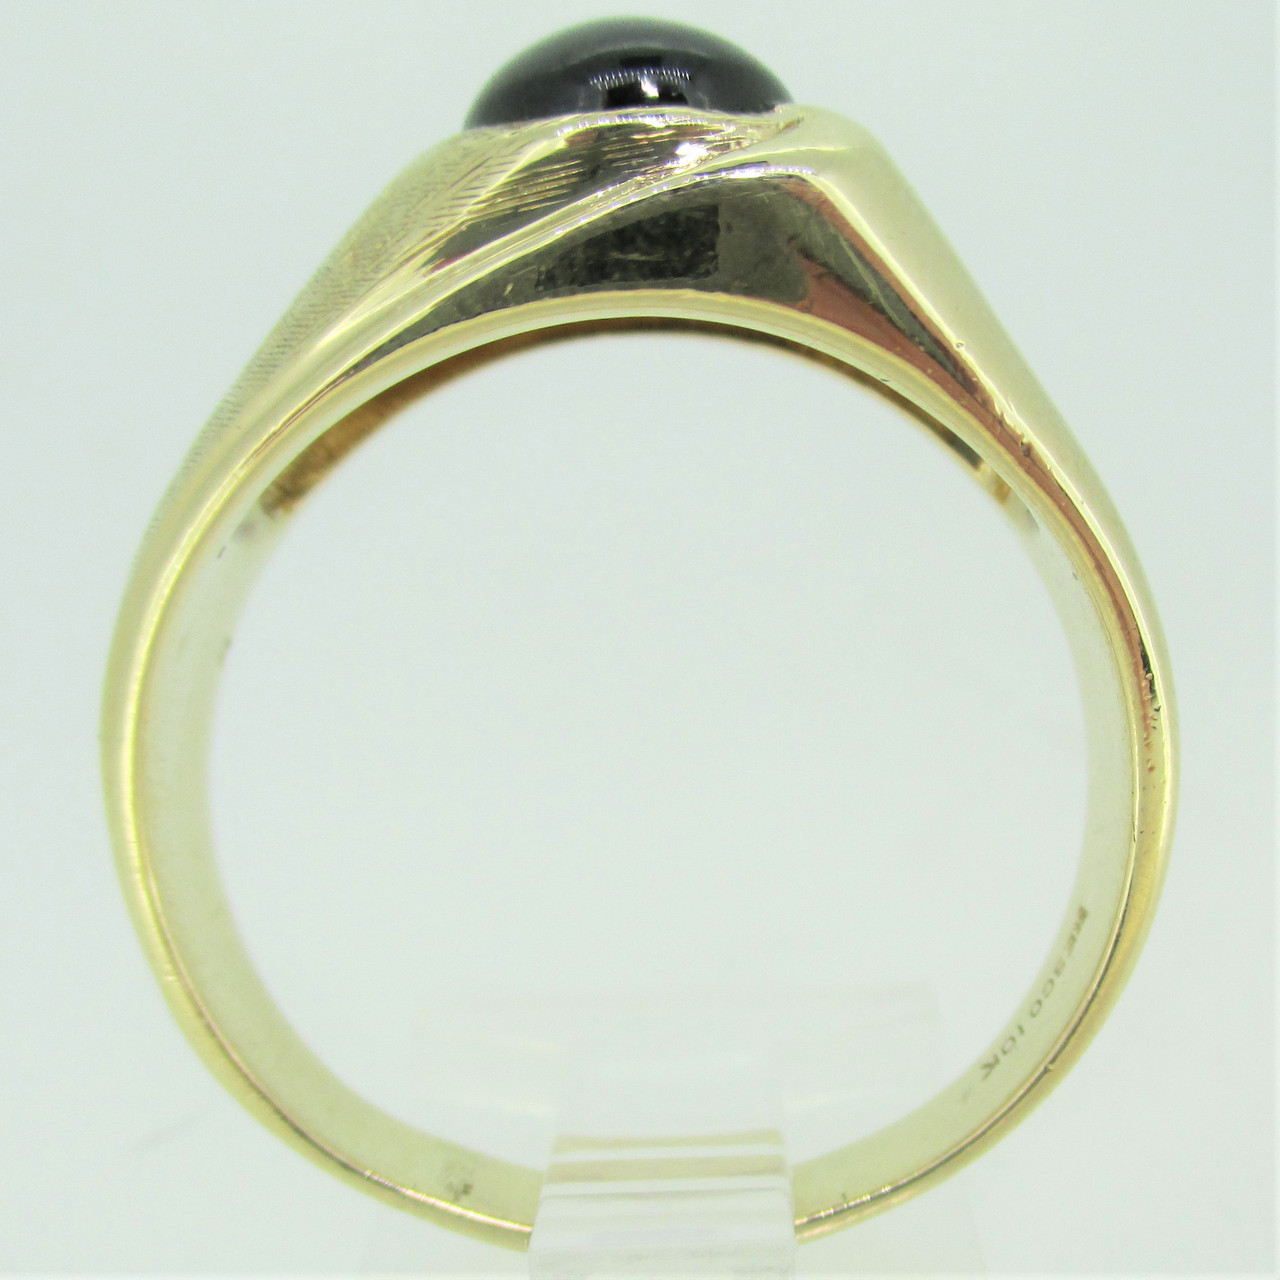 10K Gold Resco Cabochon Black Star Ring with Patterned Sides Size 12.75